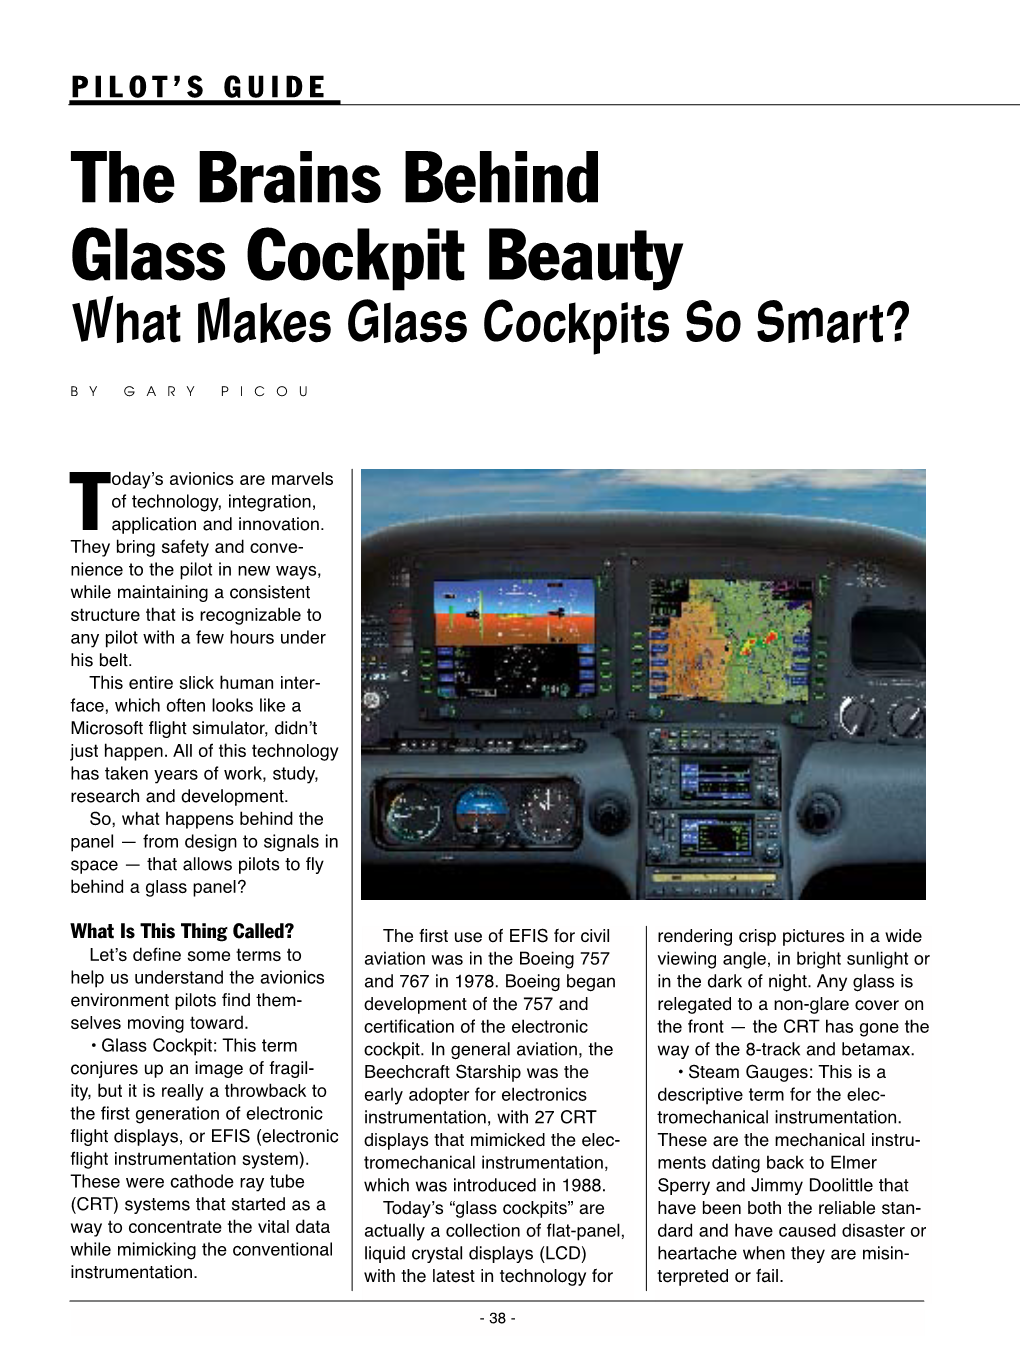 The Brains Behind Glass Cockpit Beauty What Makes Glass Cockpits So Smart?